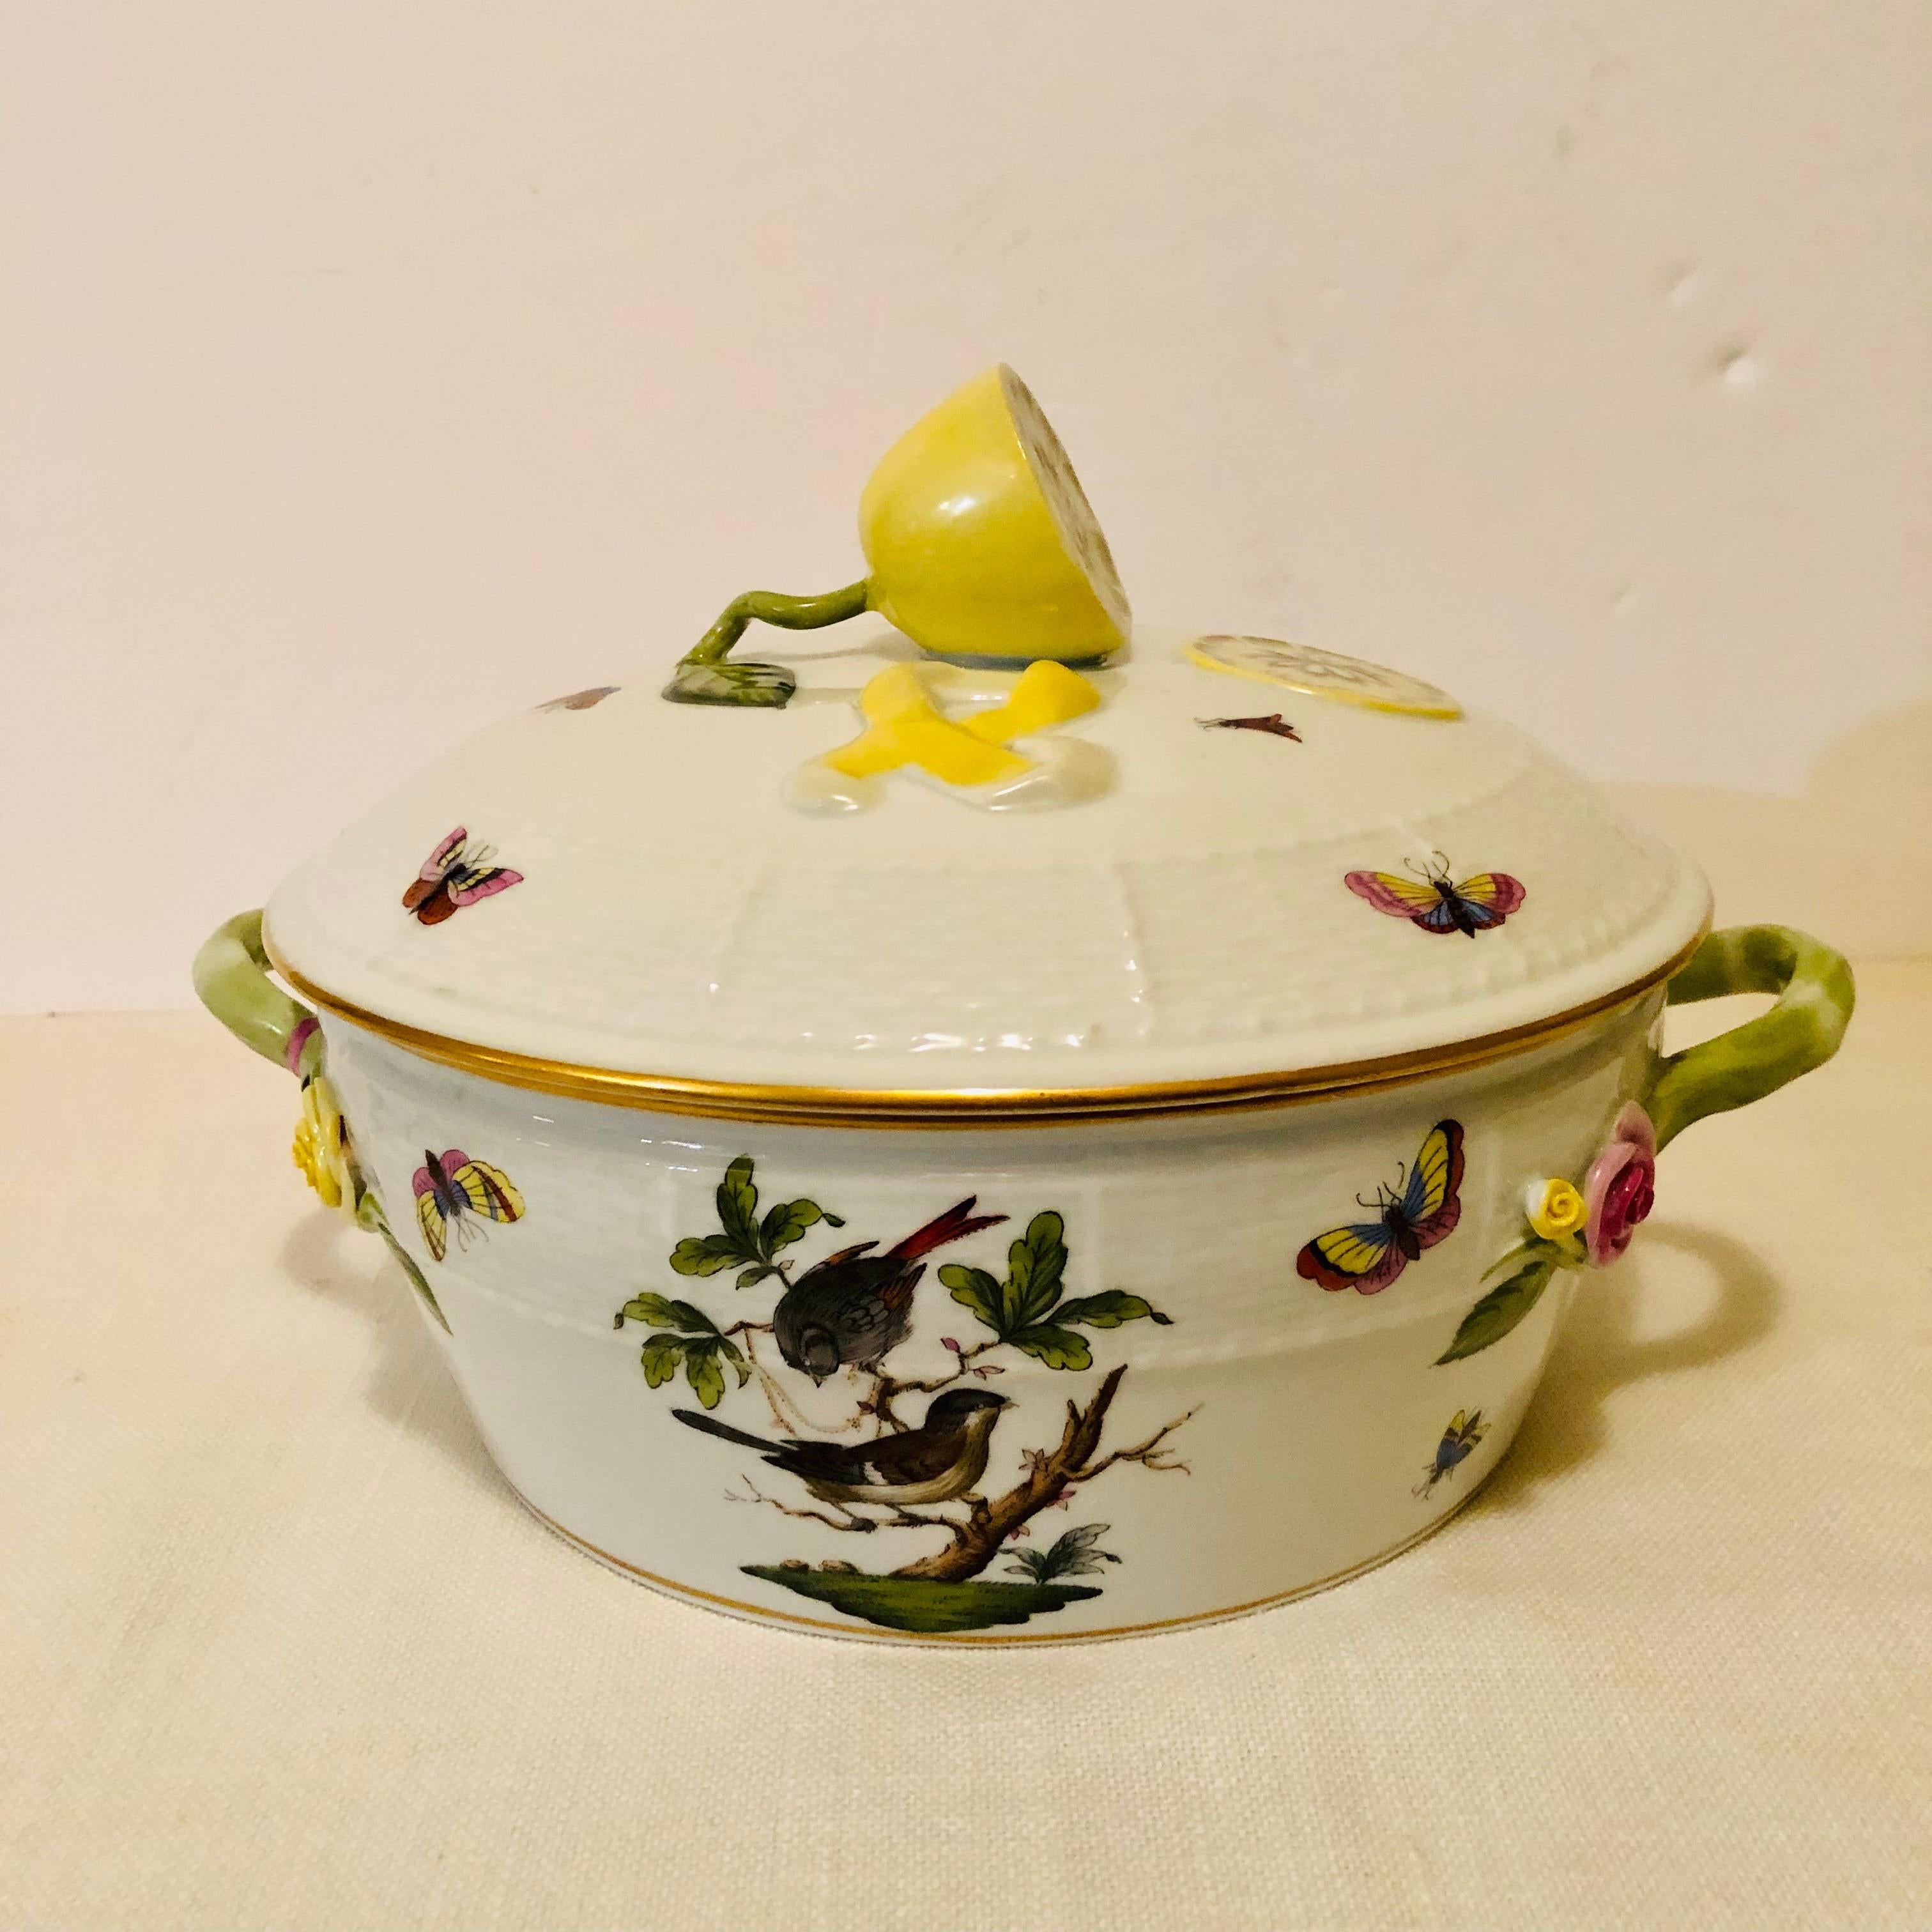 I am offering you the most wonderful and rare Rothschild Bird pattern covered bowl. The bottom of the covered bowl has a different pair of beautiful hand painted birds on both sides, which are surrounded by colorful butterflies and insects on a